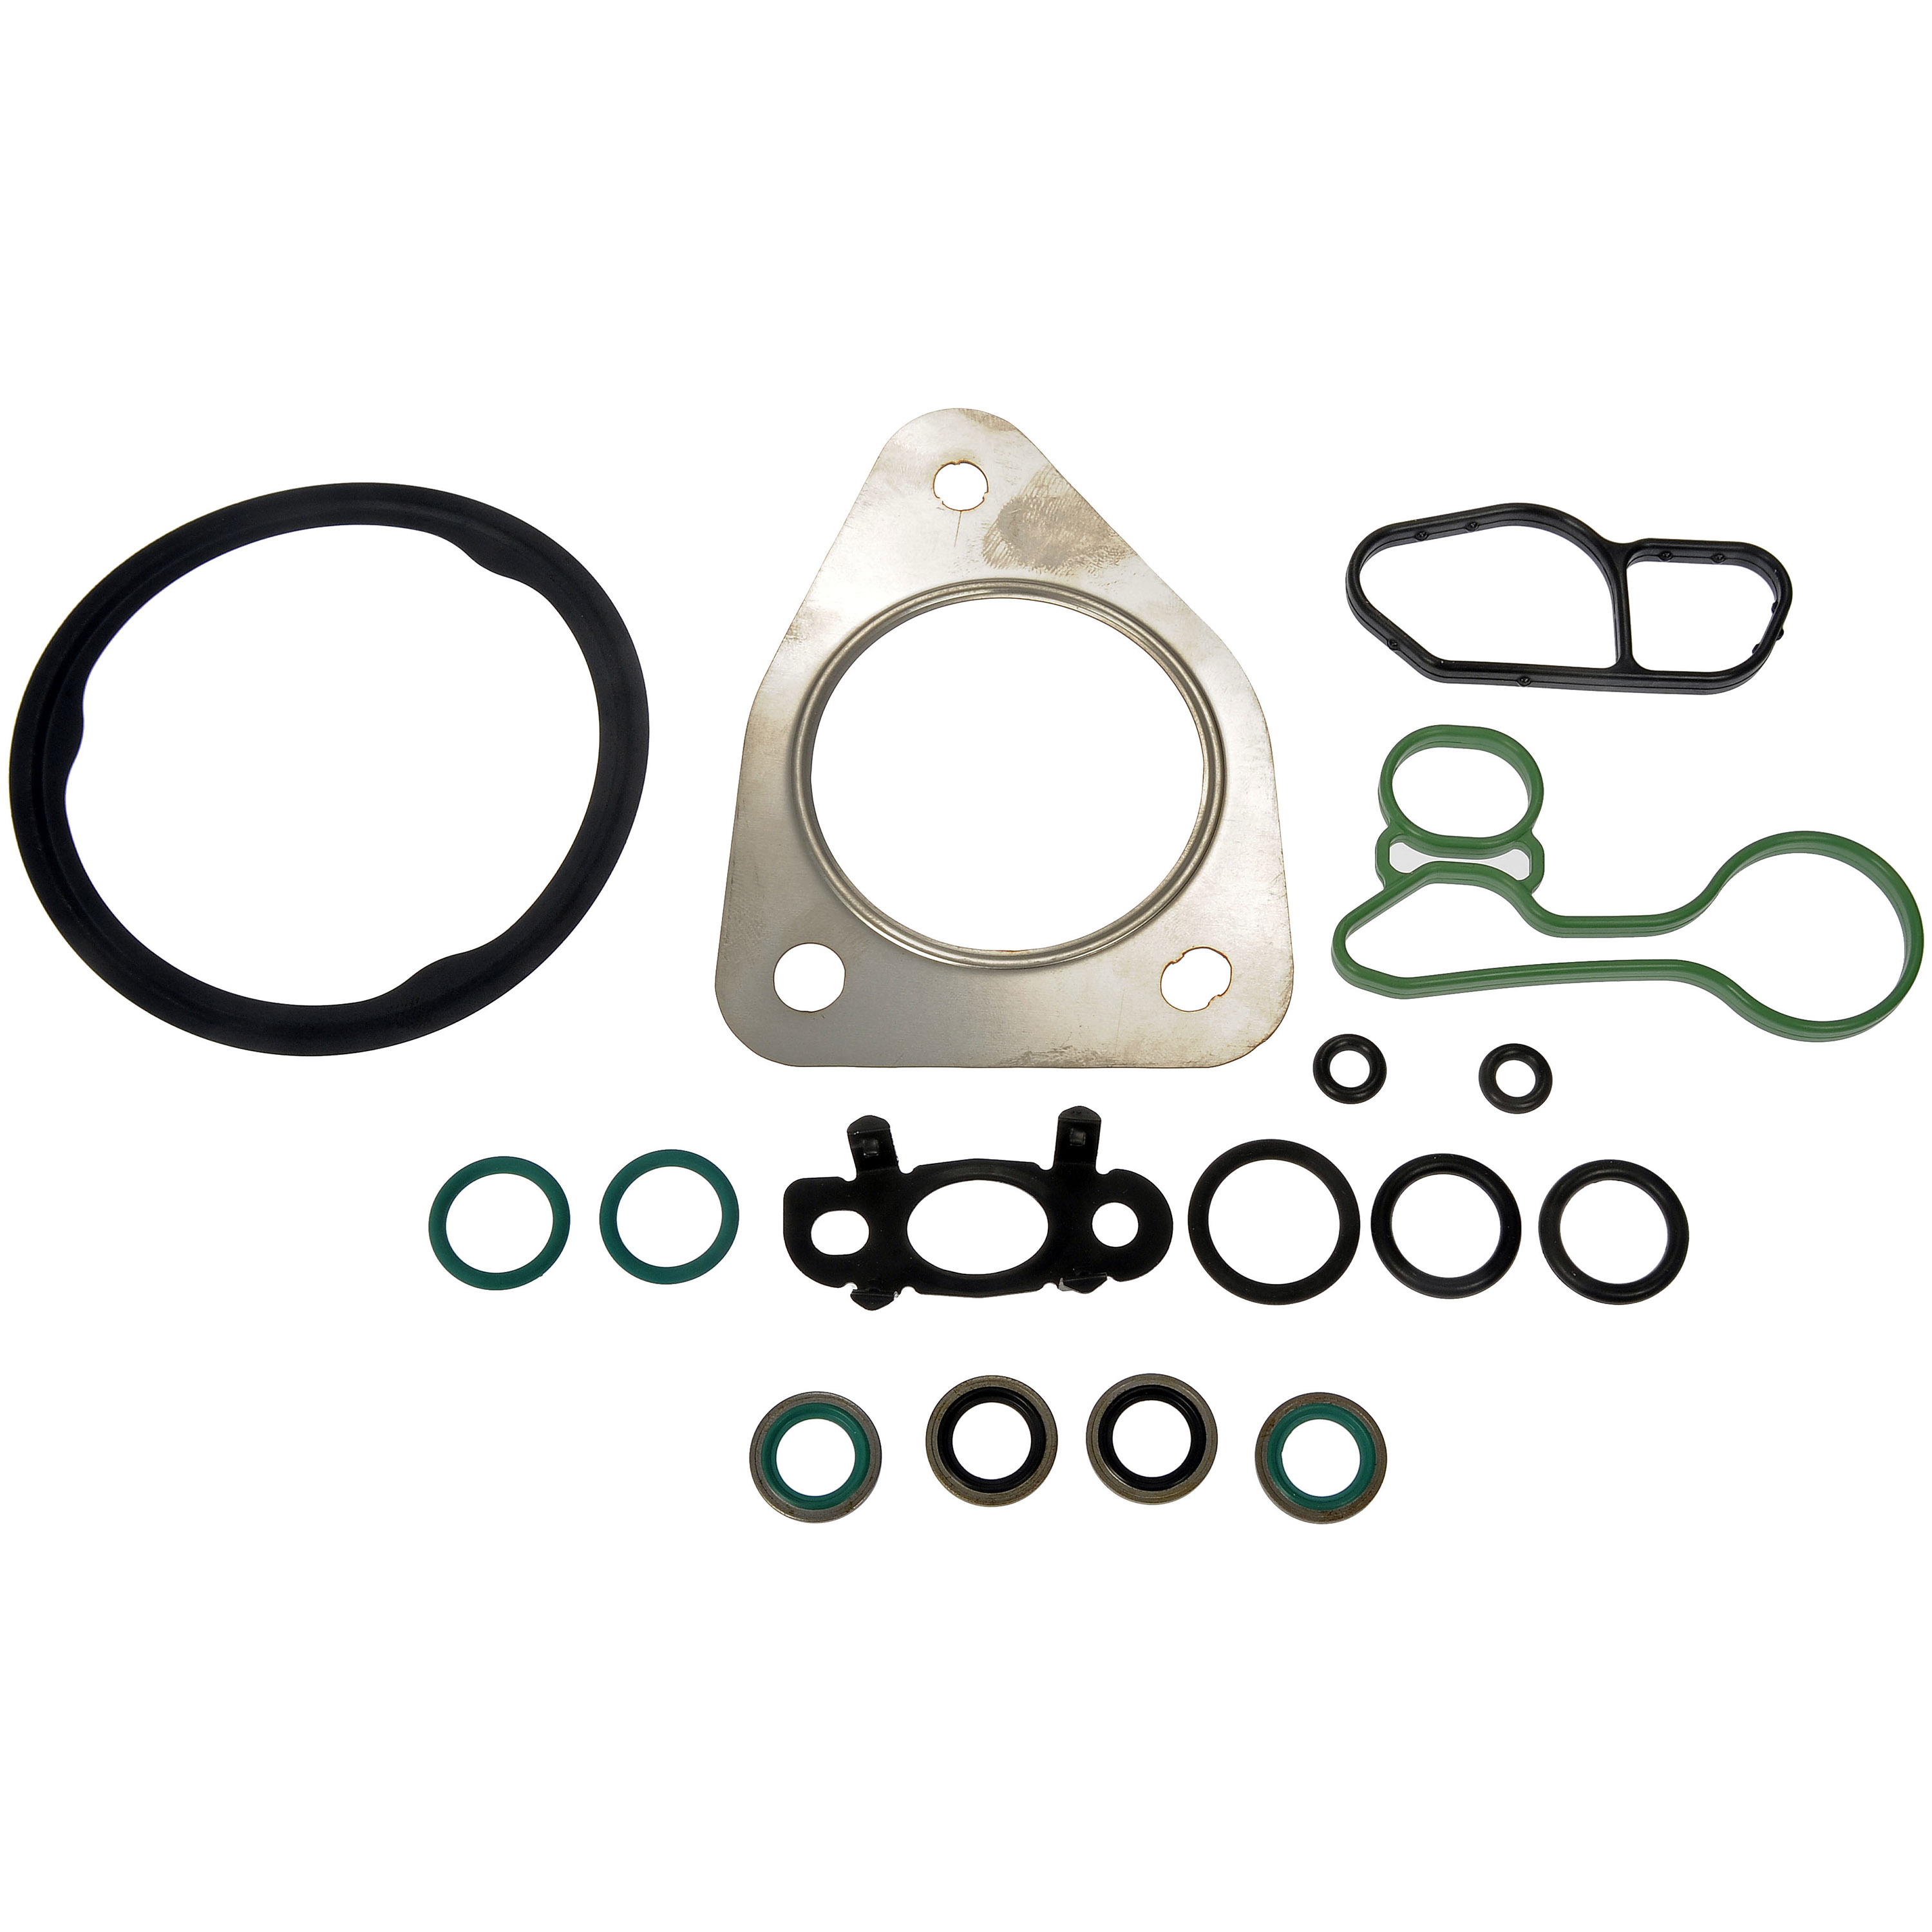 Dorman 926-166 Engine Oil Cooler Seal Kit for Specific Buick Chevrolet  Models Fits select: 2011-2016 CHEVROLET CRUZE, 2020-2021 CHEVROLET TRAX 